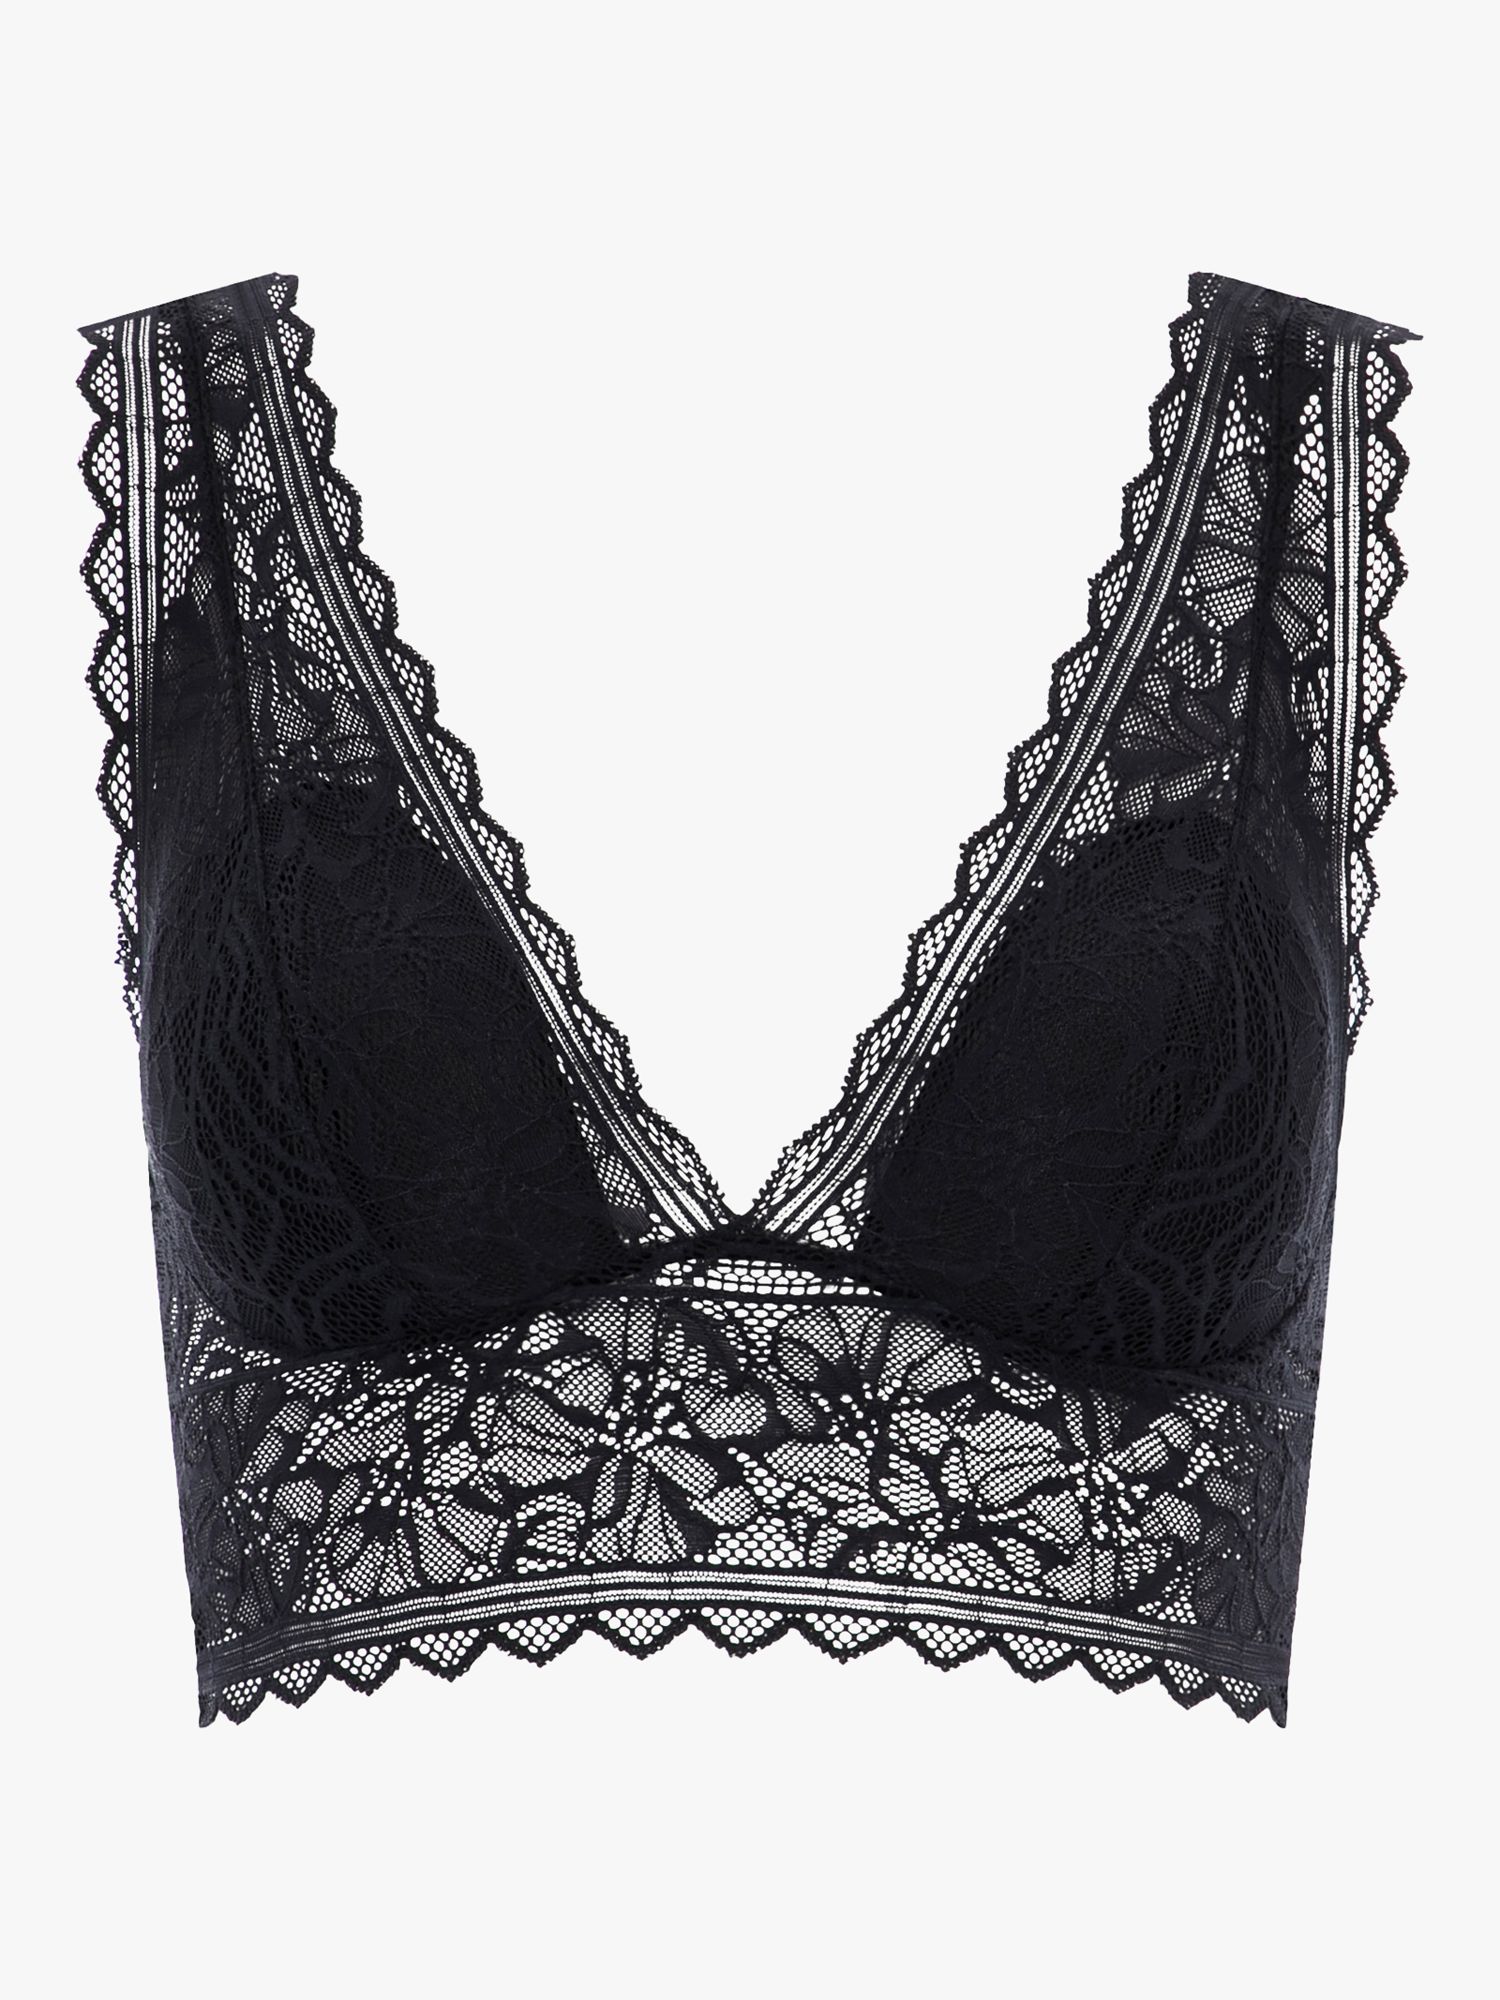 Floral Lace Detail Bralette - Black and white floral